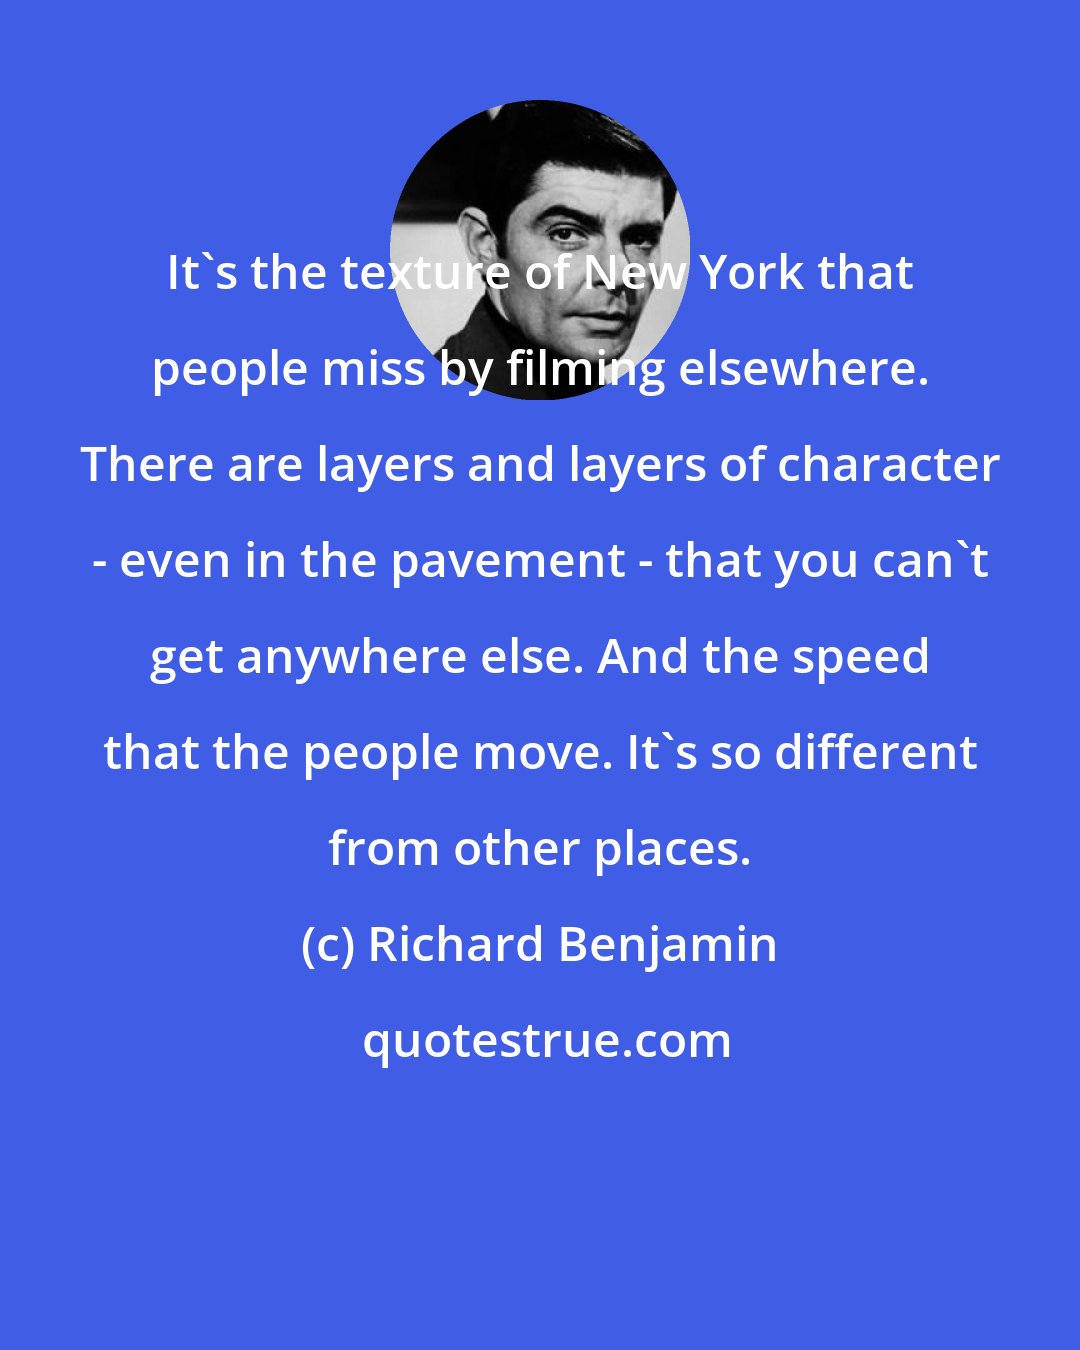 Richard Benjamin: It's the texture of New York that people miss by filming elsewhere. There are layers and layers of character - even in the pavement - that you can't get anywhere else. And the speed that the people move. It's so different from other places.